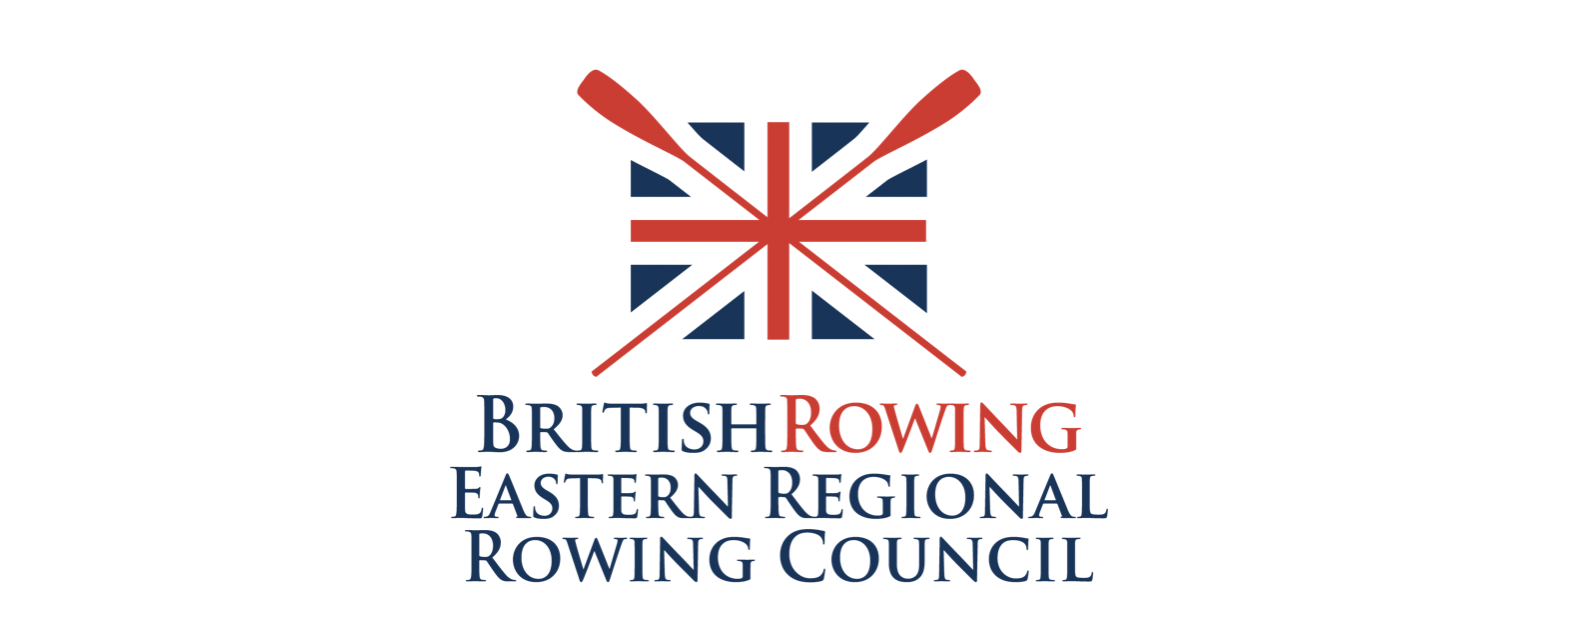 The purpose, activity and aspirations of YOUR Regional Rowing Council